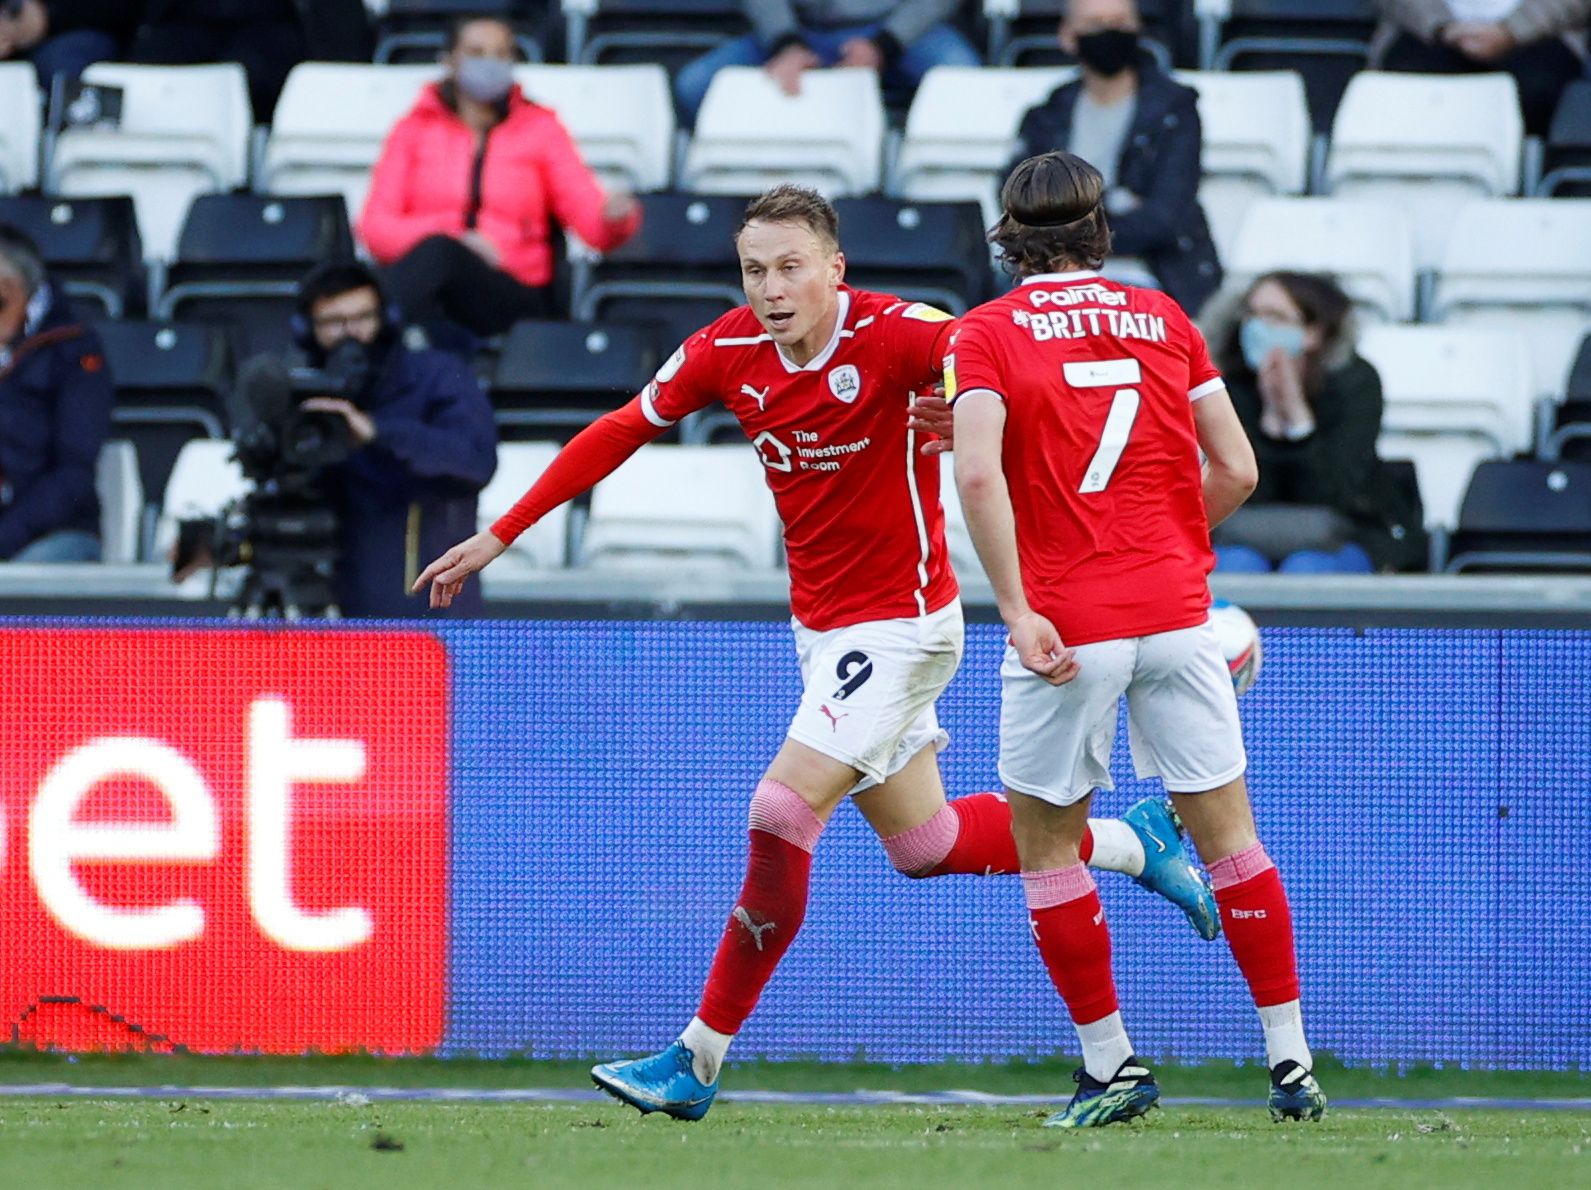 Soccer Football - Championship Play-Off Semi Final Second Leg - Swansea City v Barnsley - Liberty Stadium, Swansea, Britain - May 22, 2021  Barnsley's Cauley Woodrow celebrates scoring their first goal with Callum Brittain Action Images via Reuters/John Sibley    EDITORIAL USE ONLY. No use with unauthorized audio, video, data, fixture lists, club/league logos or "live" services. Online in-match use limited to 75 images, no video emulation. No use in betting, games or single club/league/player pu